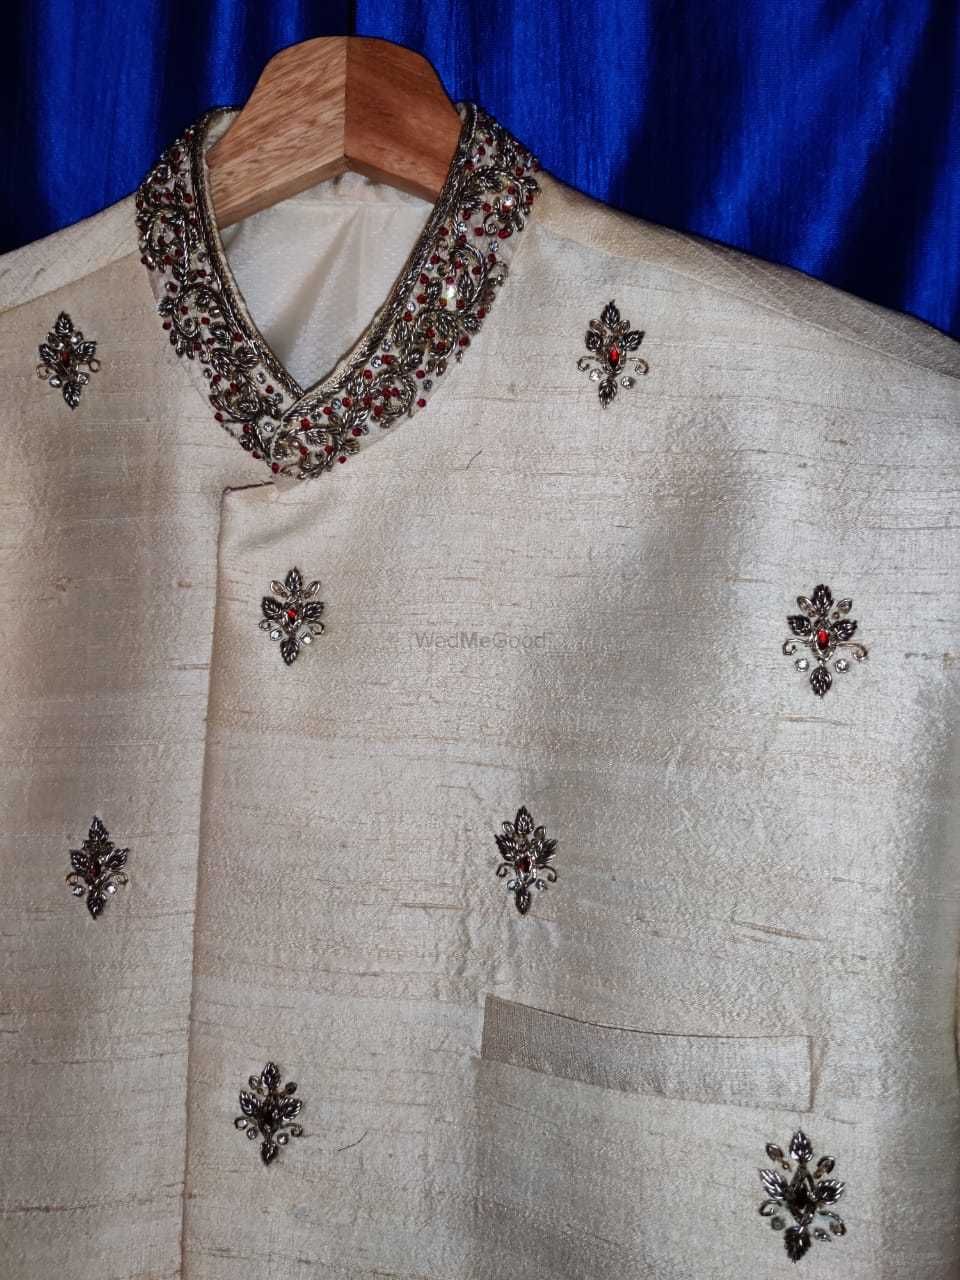 Photo From Sherwani Client - By HILO DESIGN